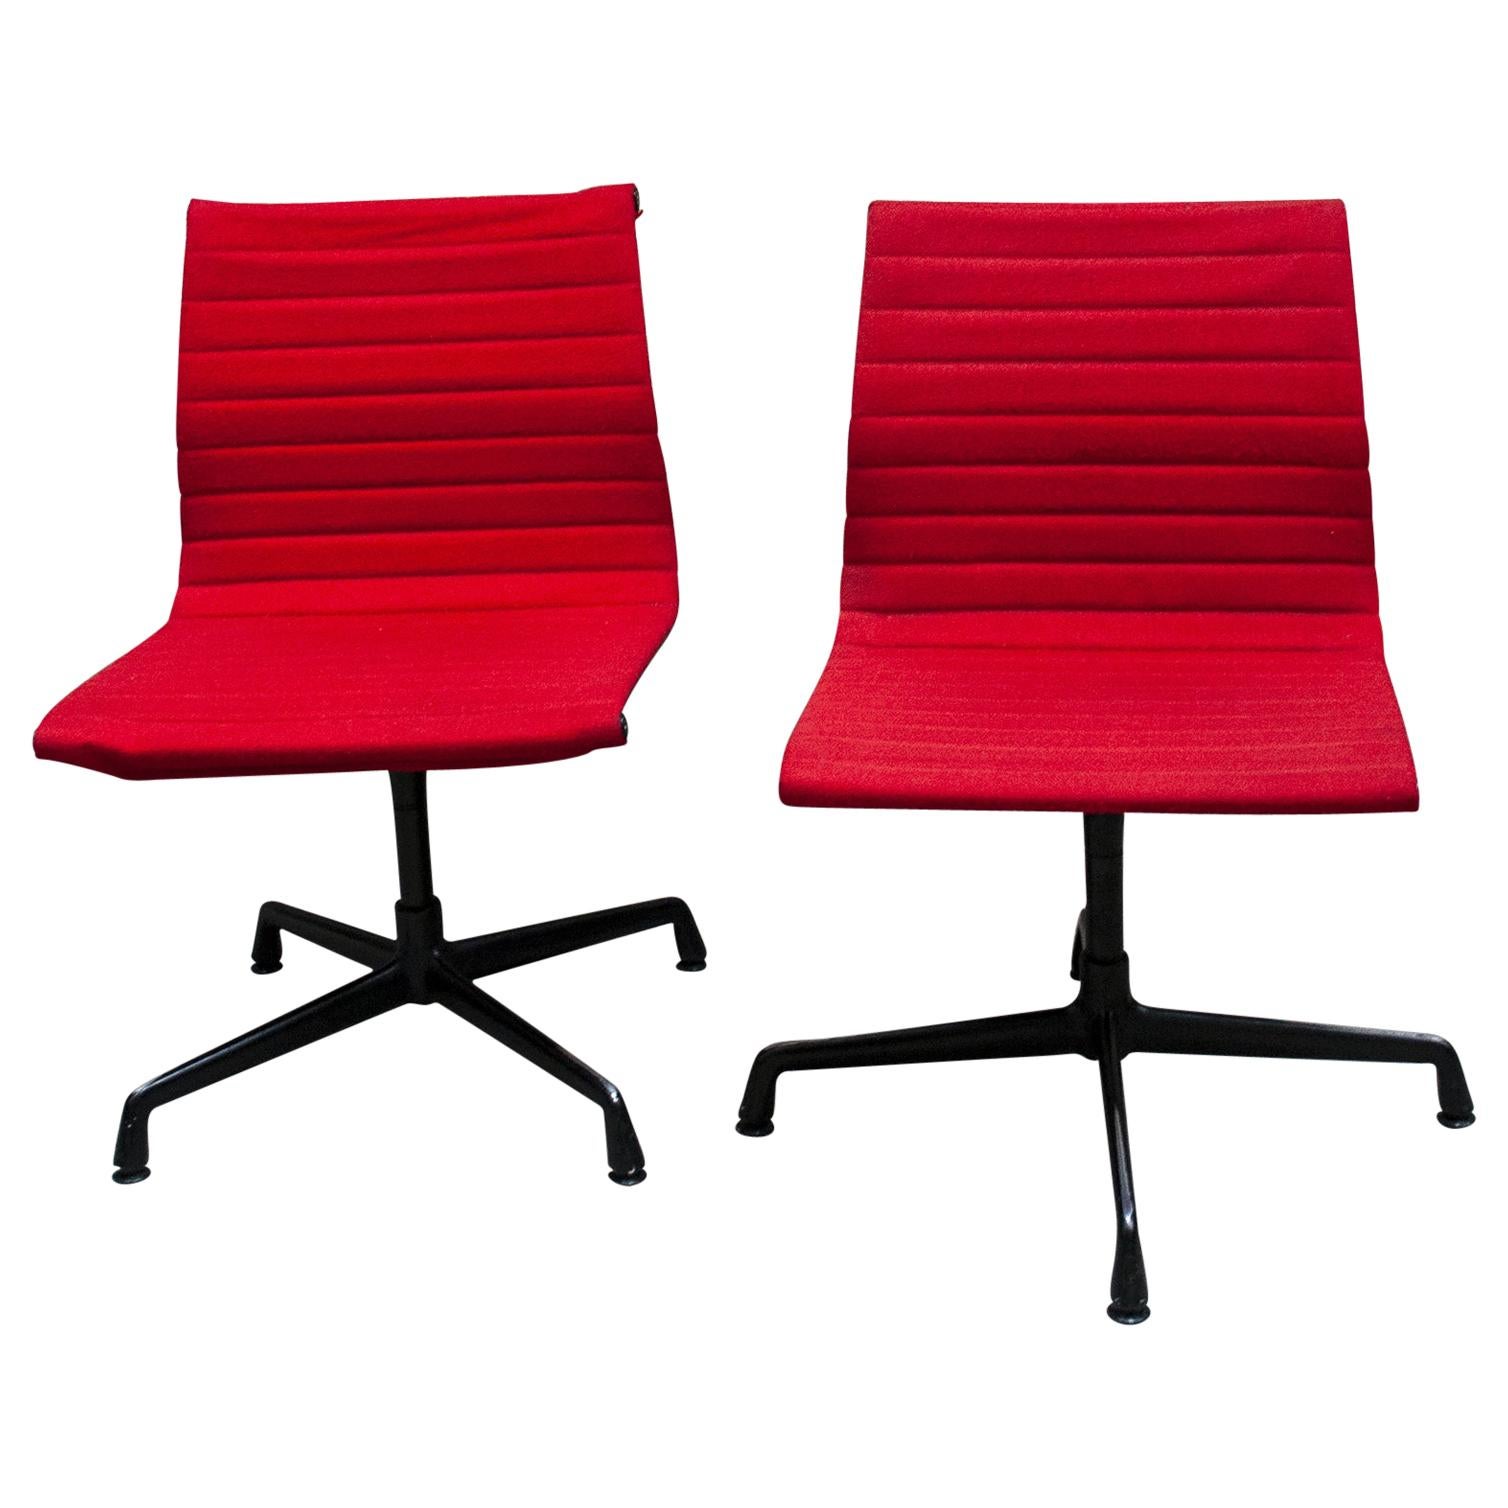 Pair of Aluminum Chair by Charles & Ray Eames for Herman Miller, 1980s For Sale